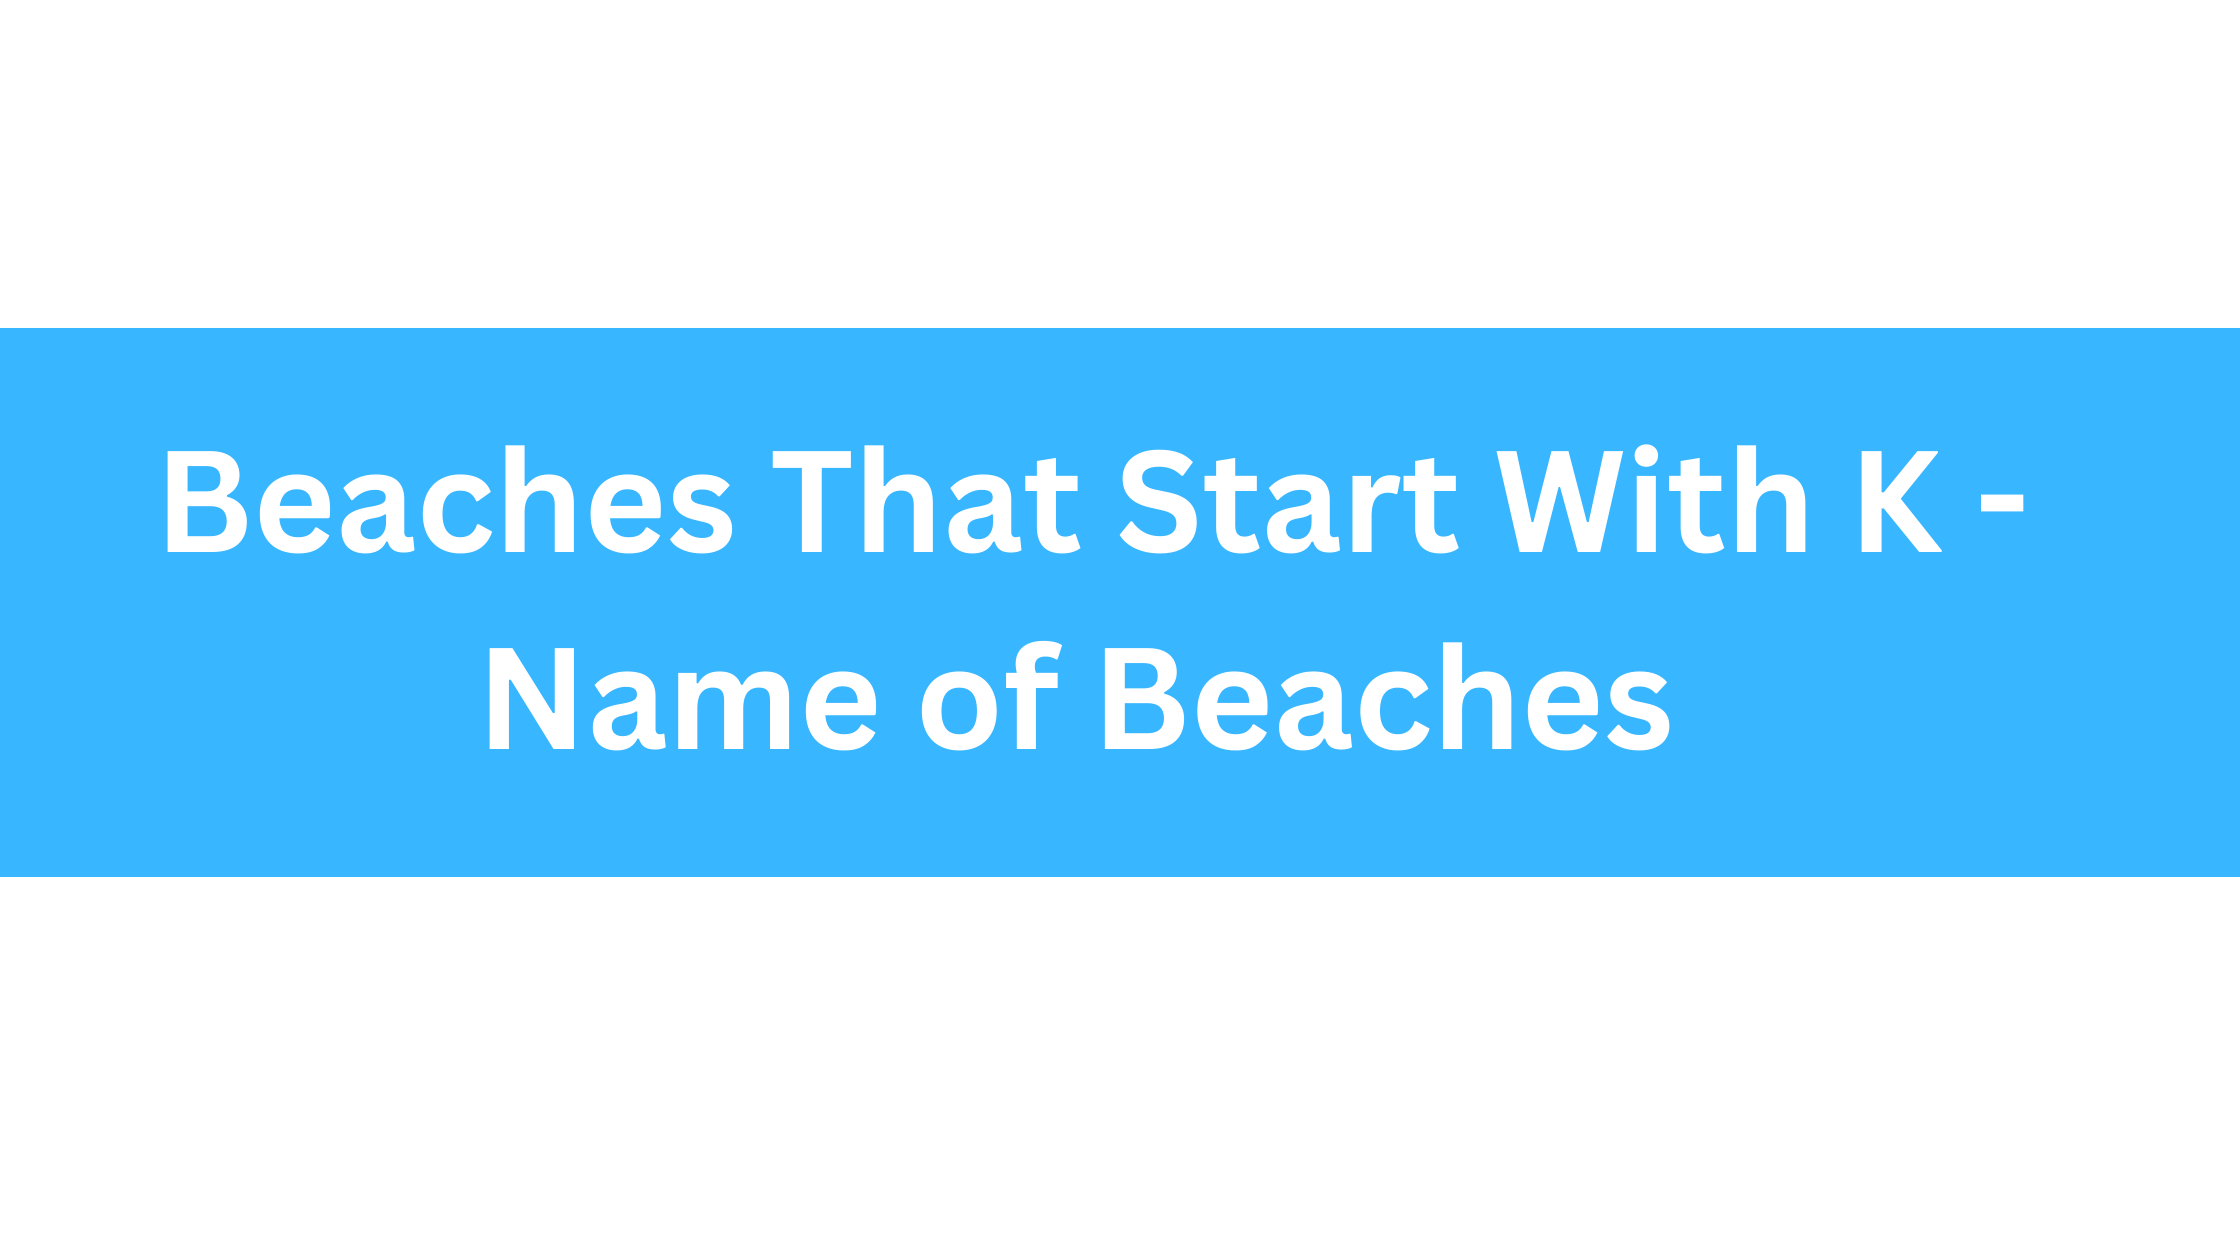 Beaches That Start With K